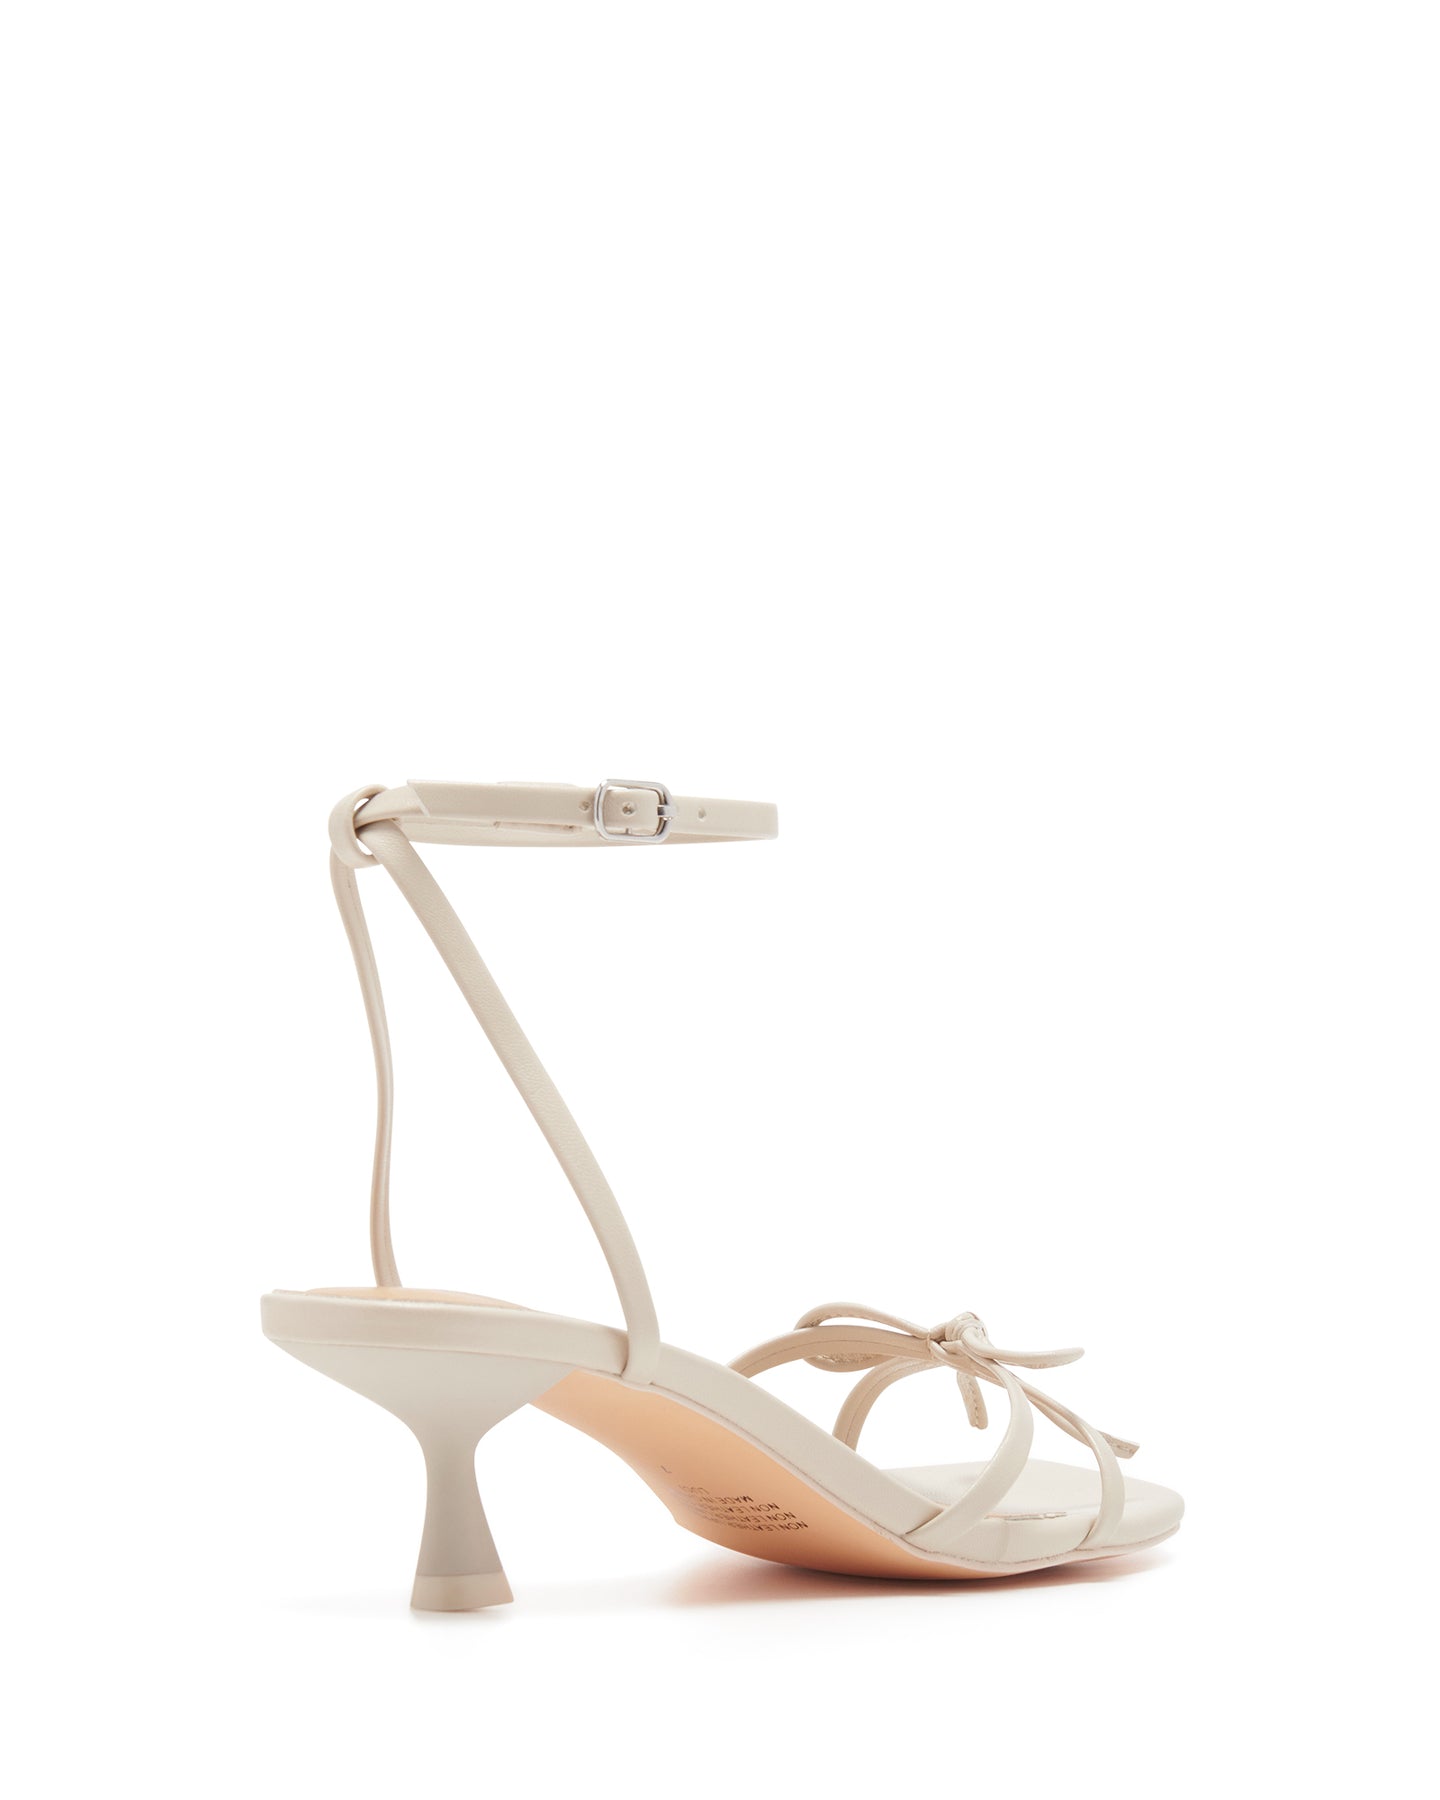 London Rebel White Leather-Look Strappy Block Heel Sandals | New Look